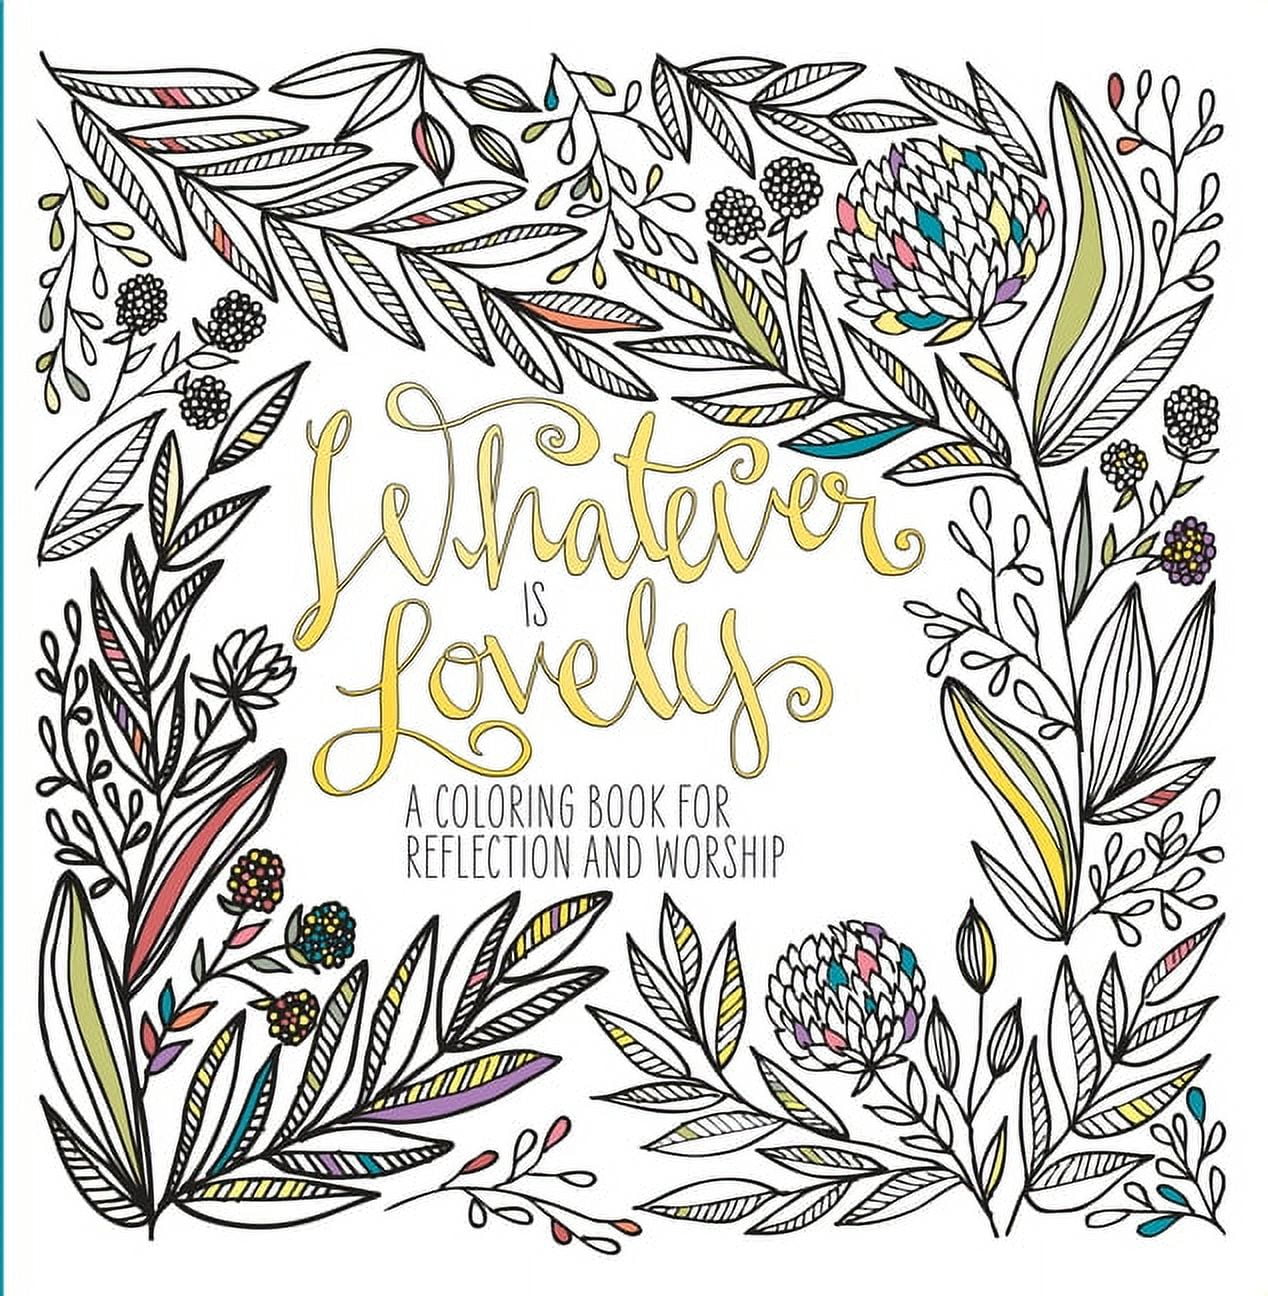 Artist Cashes in on Adult Coloring Book Craze